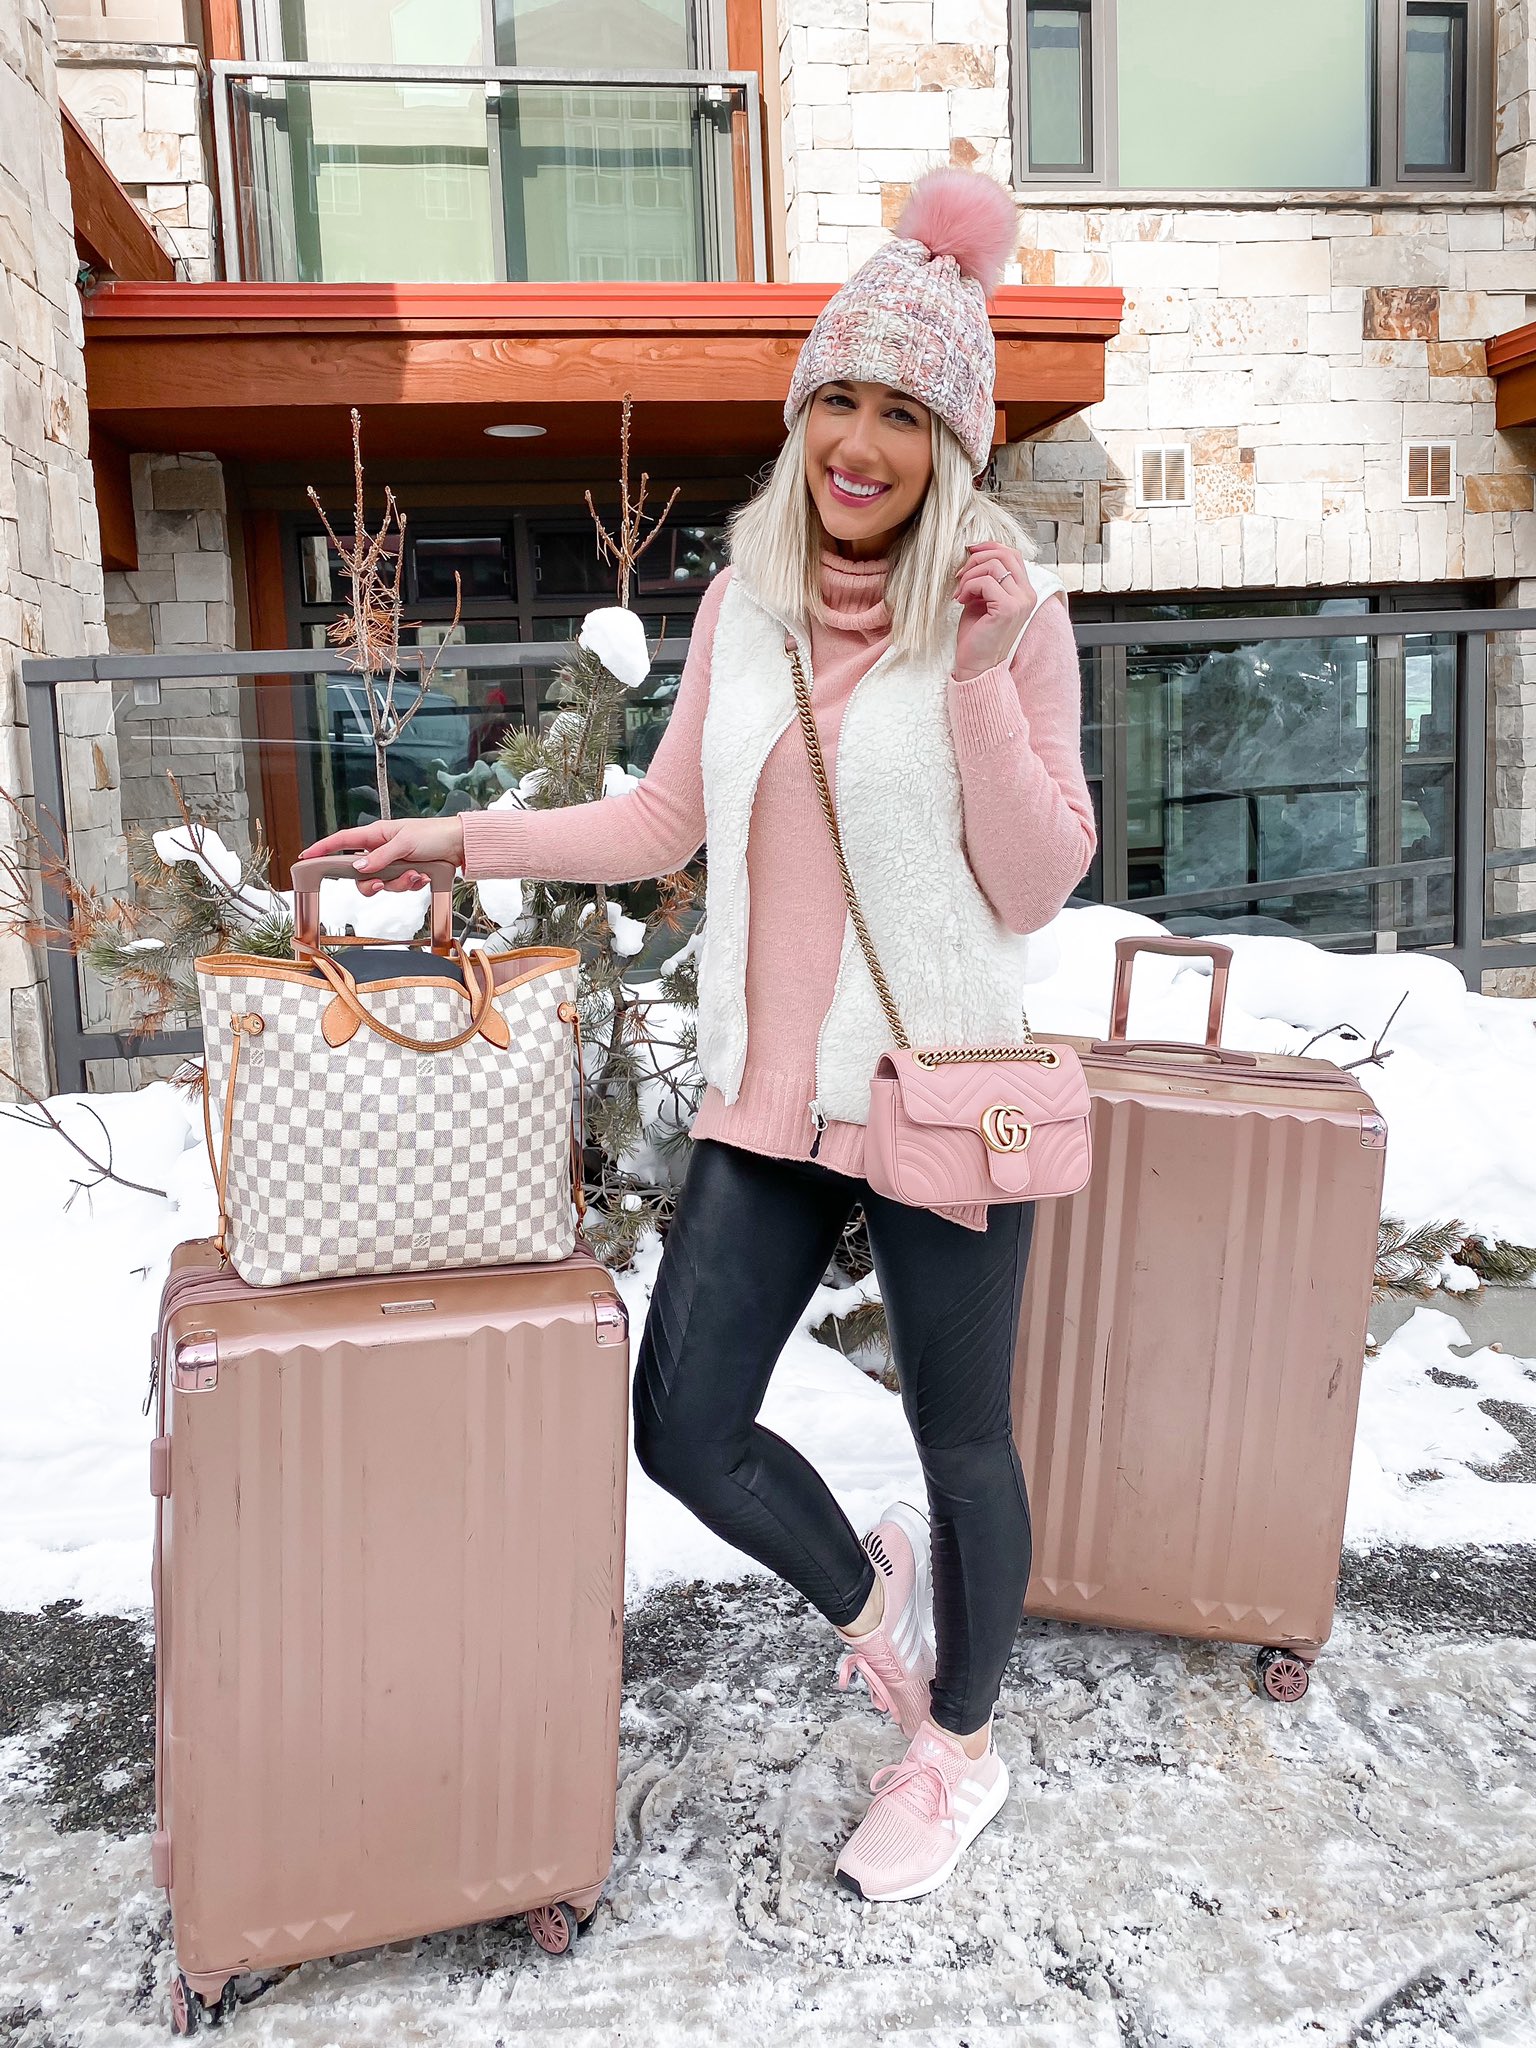 Laura Beverlin on X: All packed up!! ✈️ I can't wait to get home &  snuggle my pups! Lots of questions about my sweater—it's soo soft & my  fav color ever! Everything